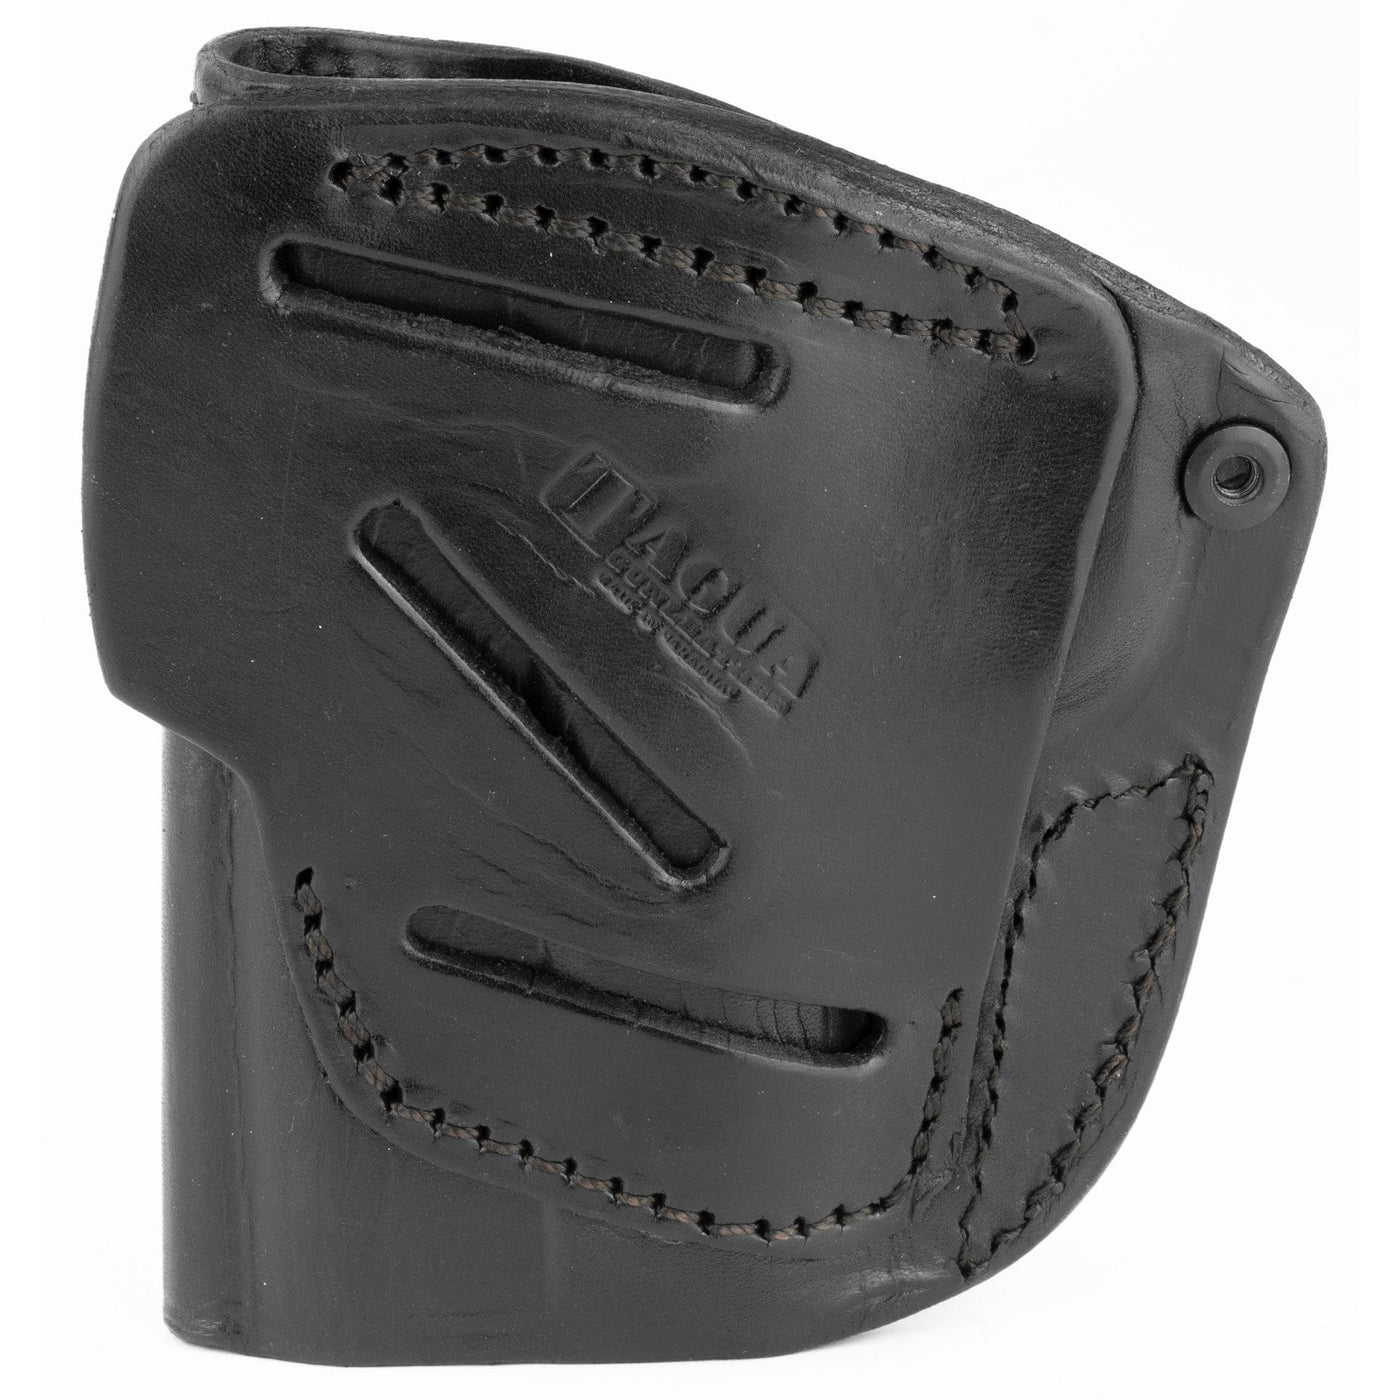 Tagua Tagua Iph 4-in-1 Sw Sigma Rh Blk Holsters